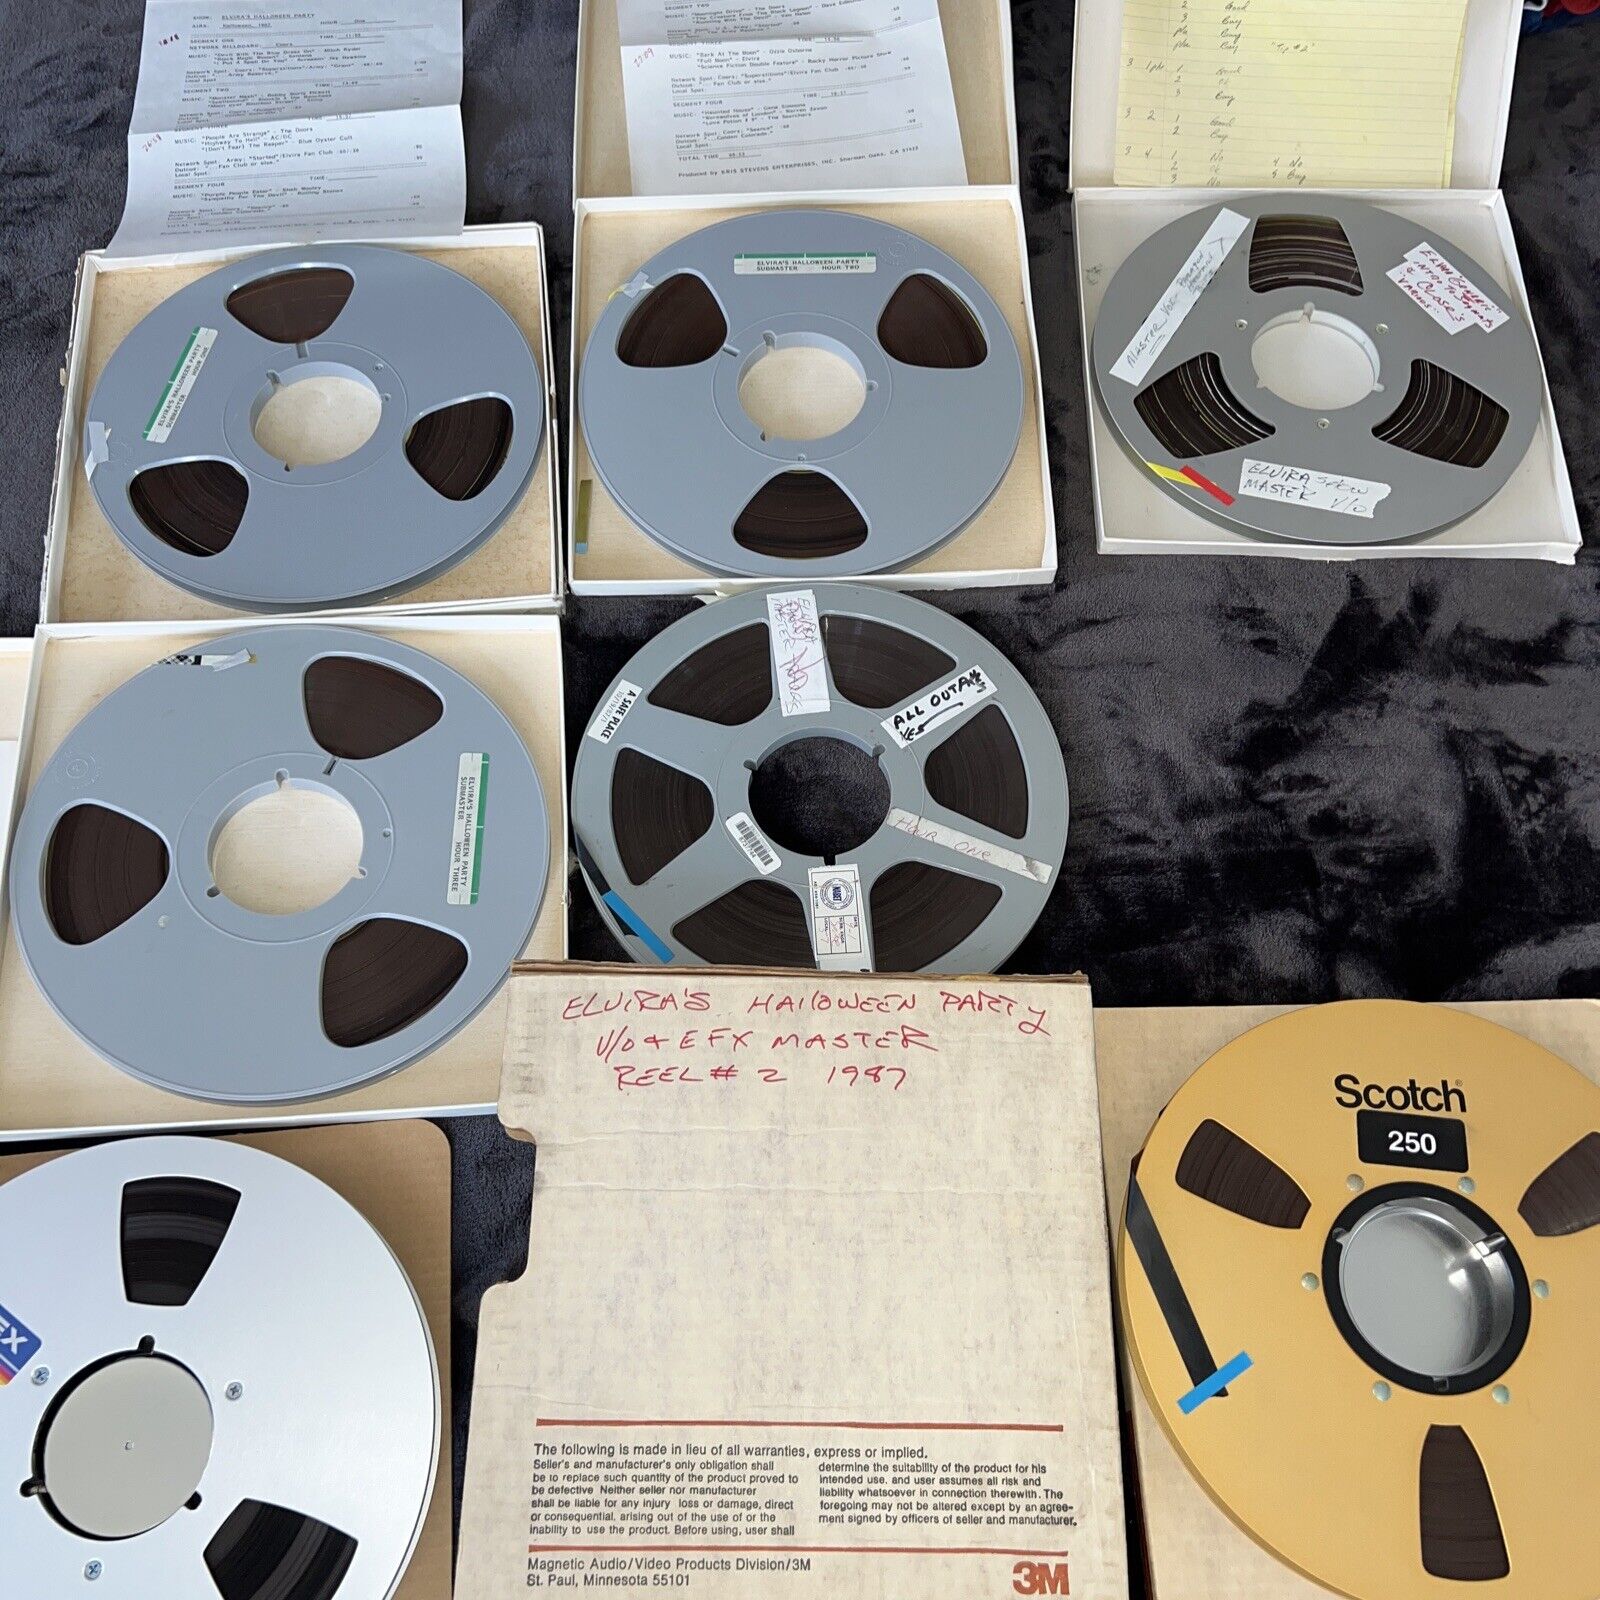 Elvira Halloween Party Show Original Reels Set Of 7 extremely rare 1987 network